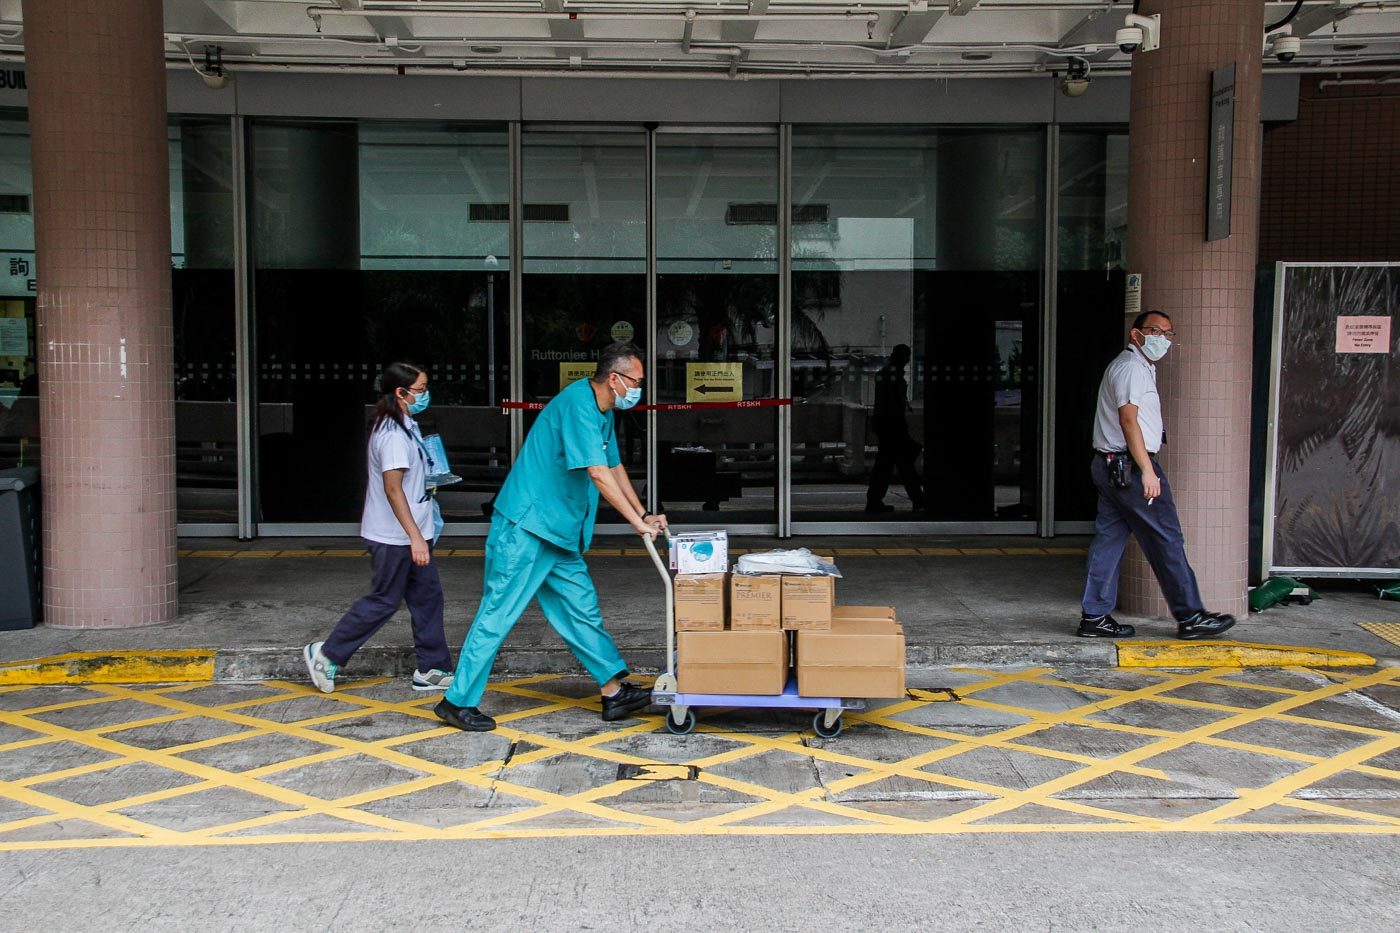 After COVID-19 success, Hong Kong’s health workers worry about reopening